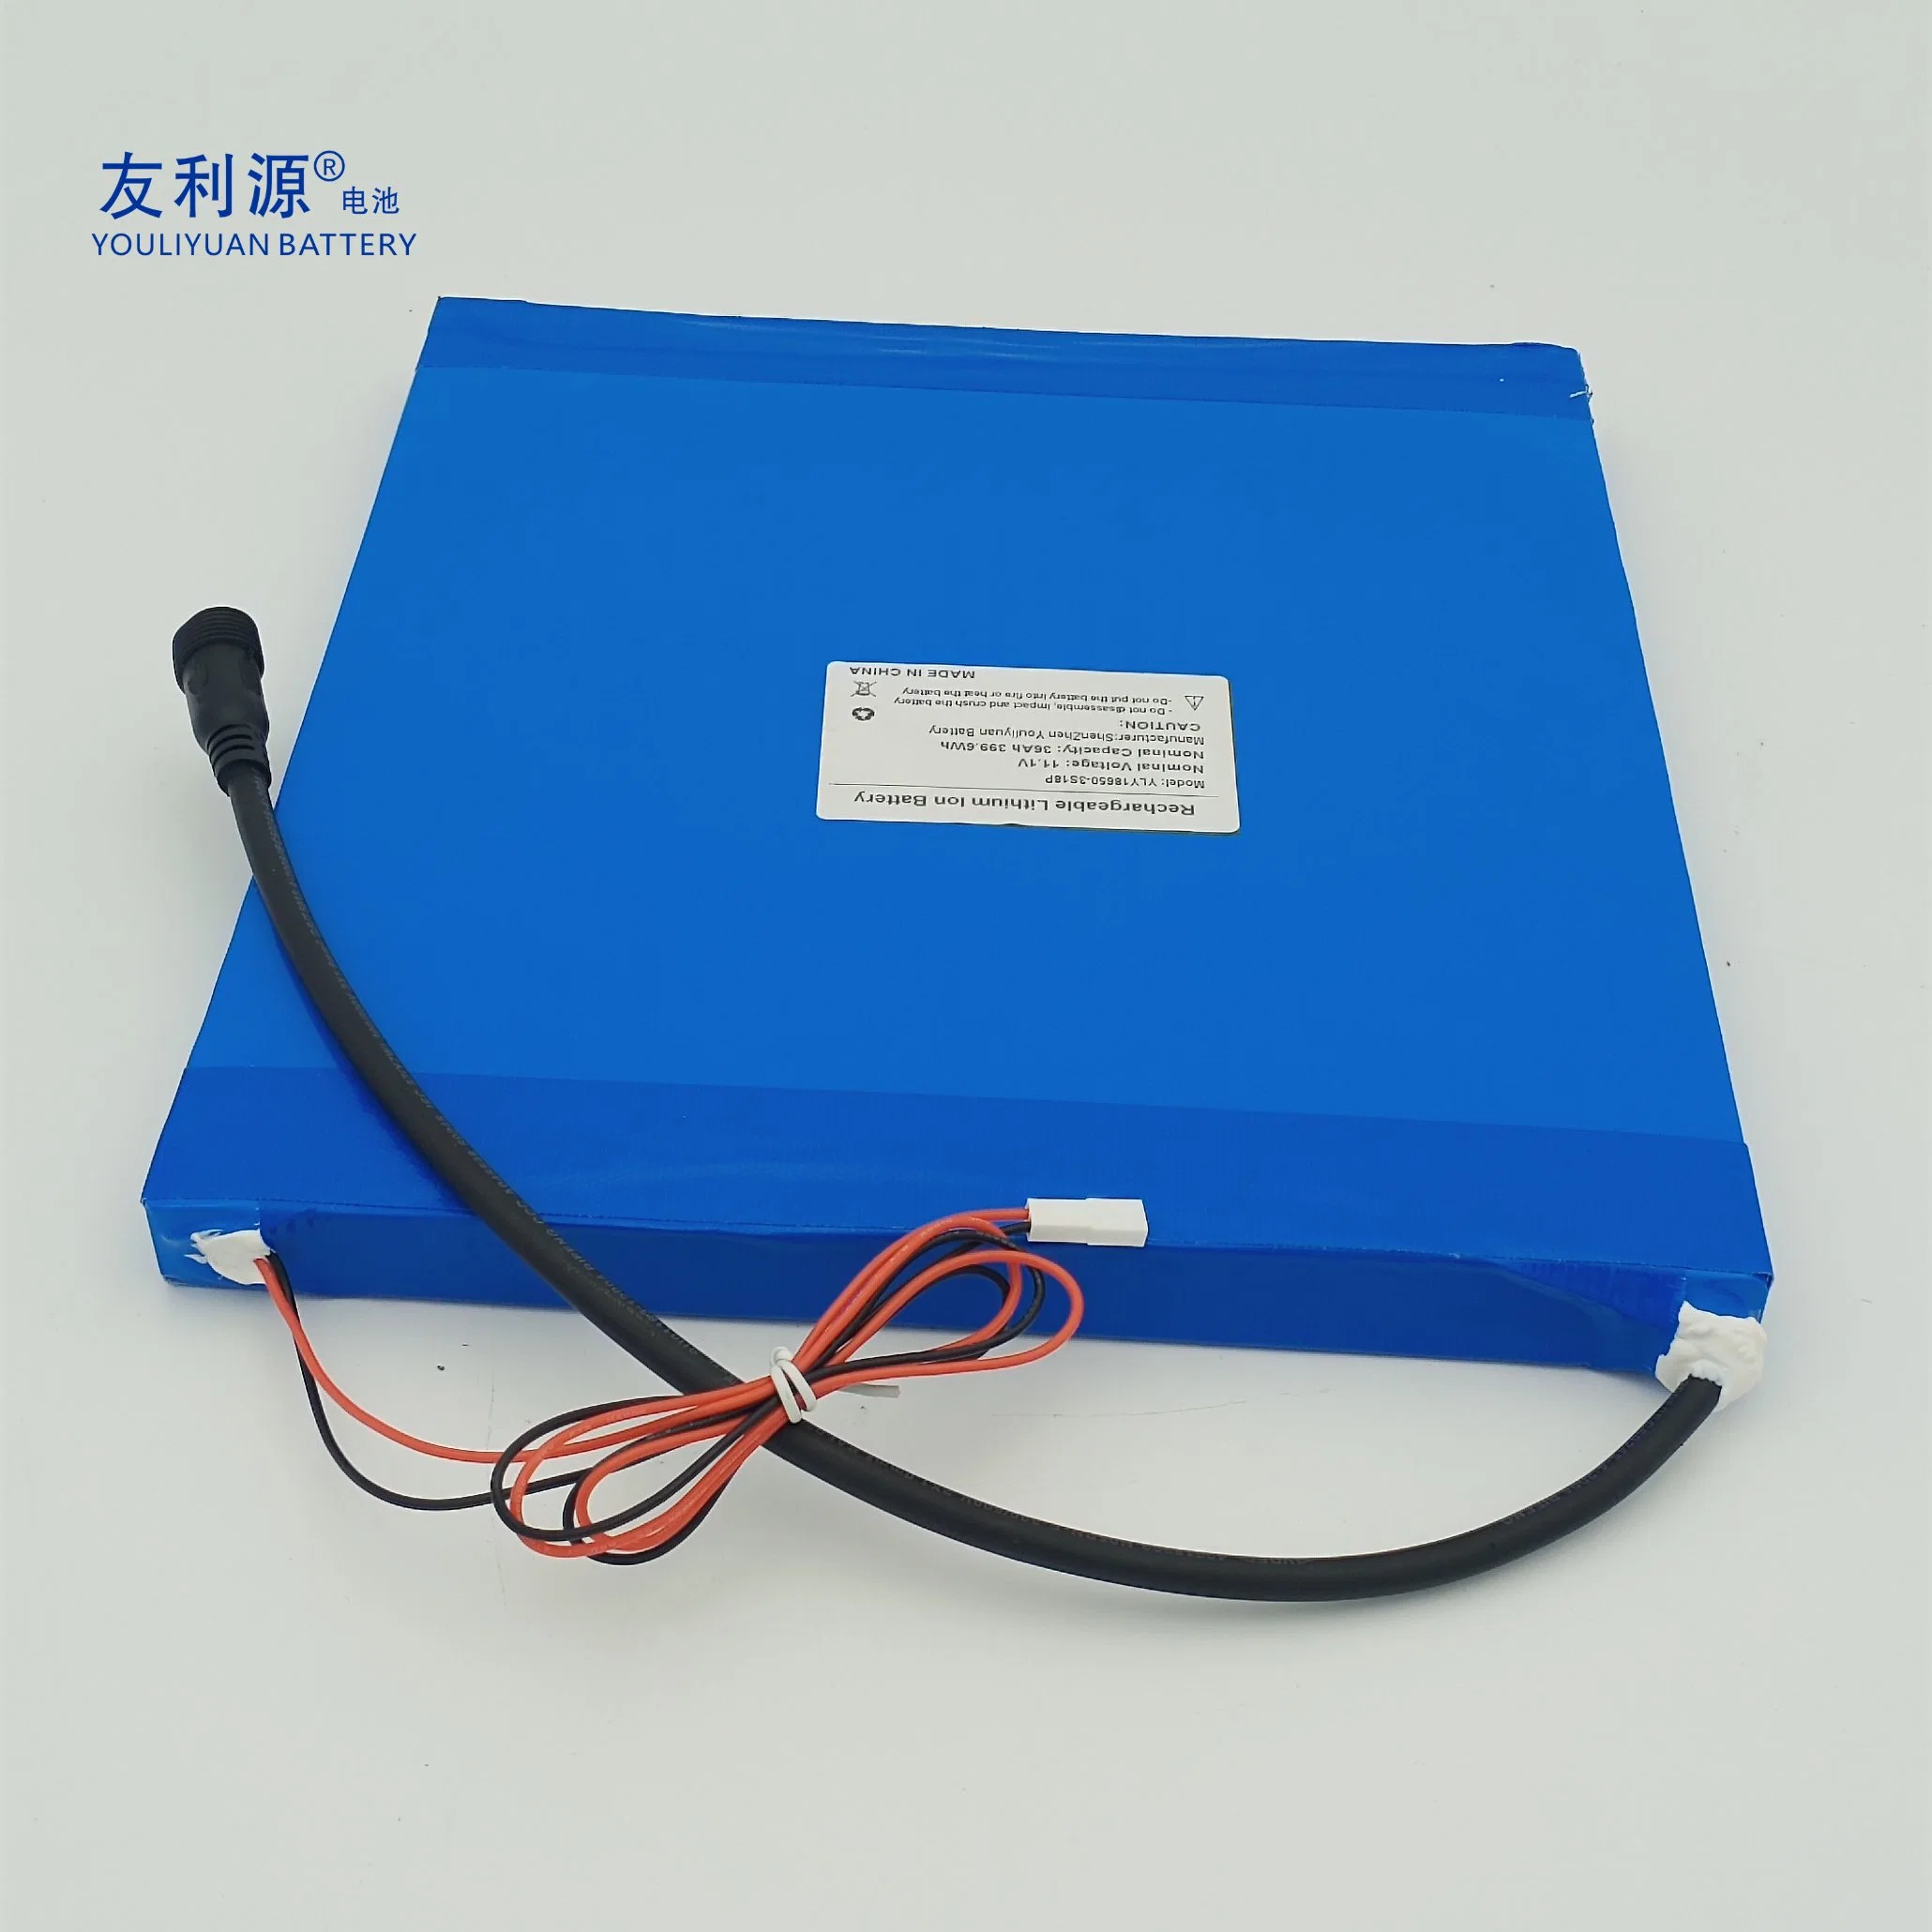 Custom High Quality 12V 36ah LiFePO4 Battery Pack Energy Storage Rechargeable Lithium Battery Medical Battery for Blood Pressure Instrument